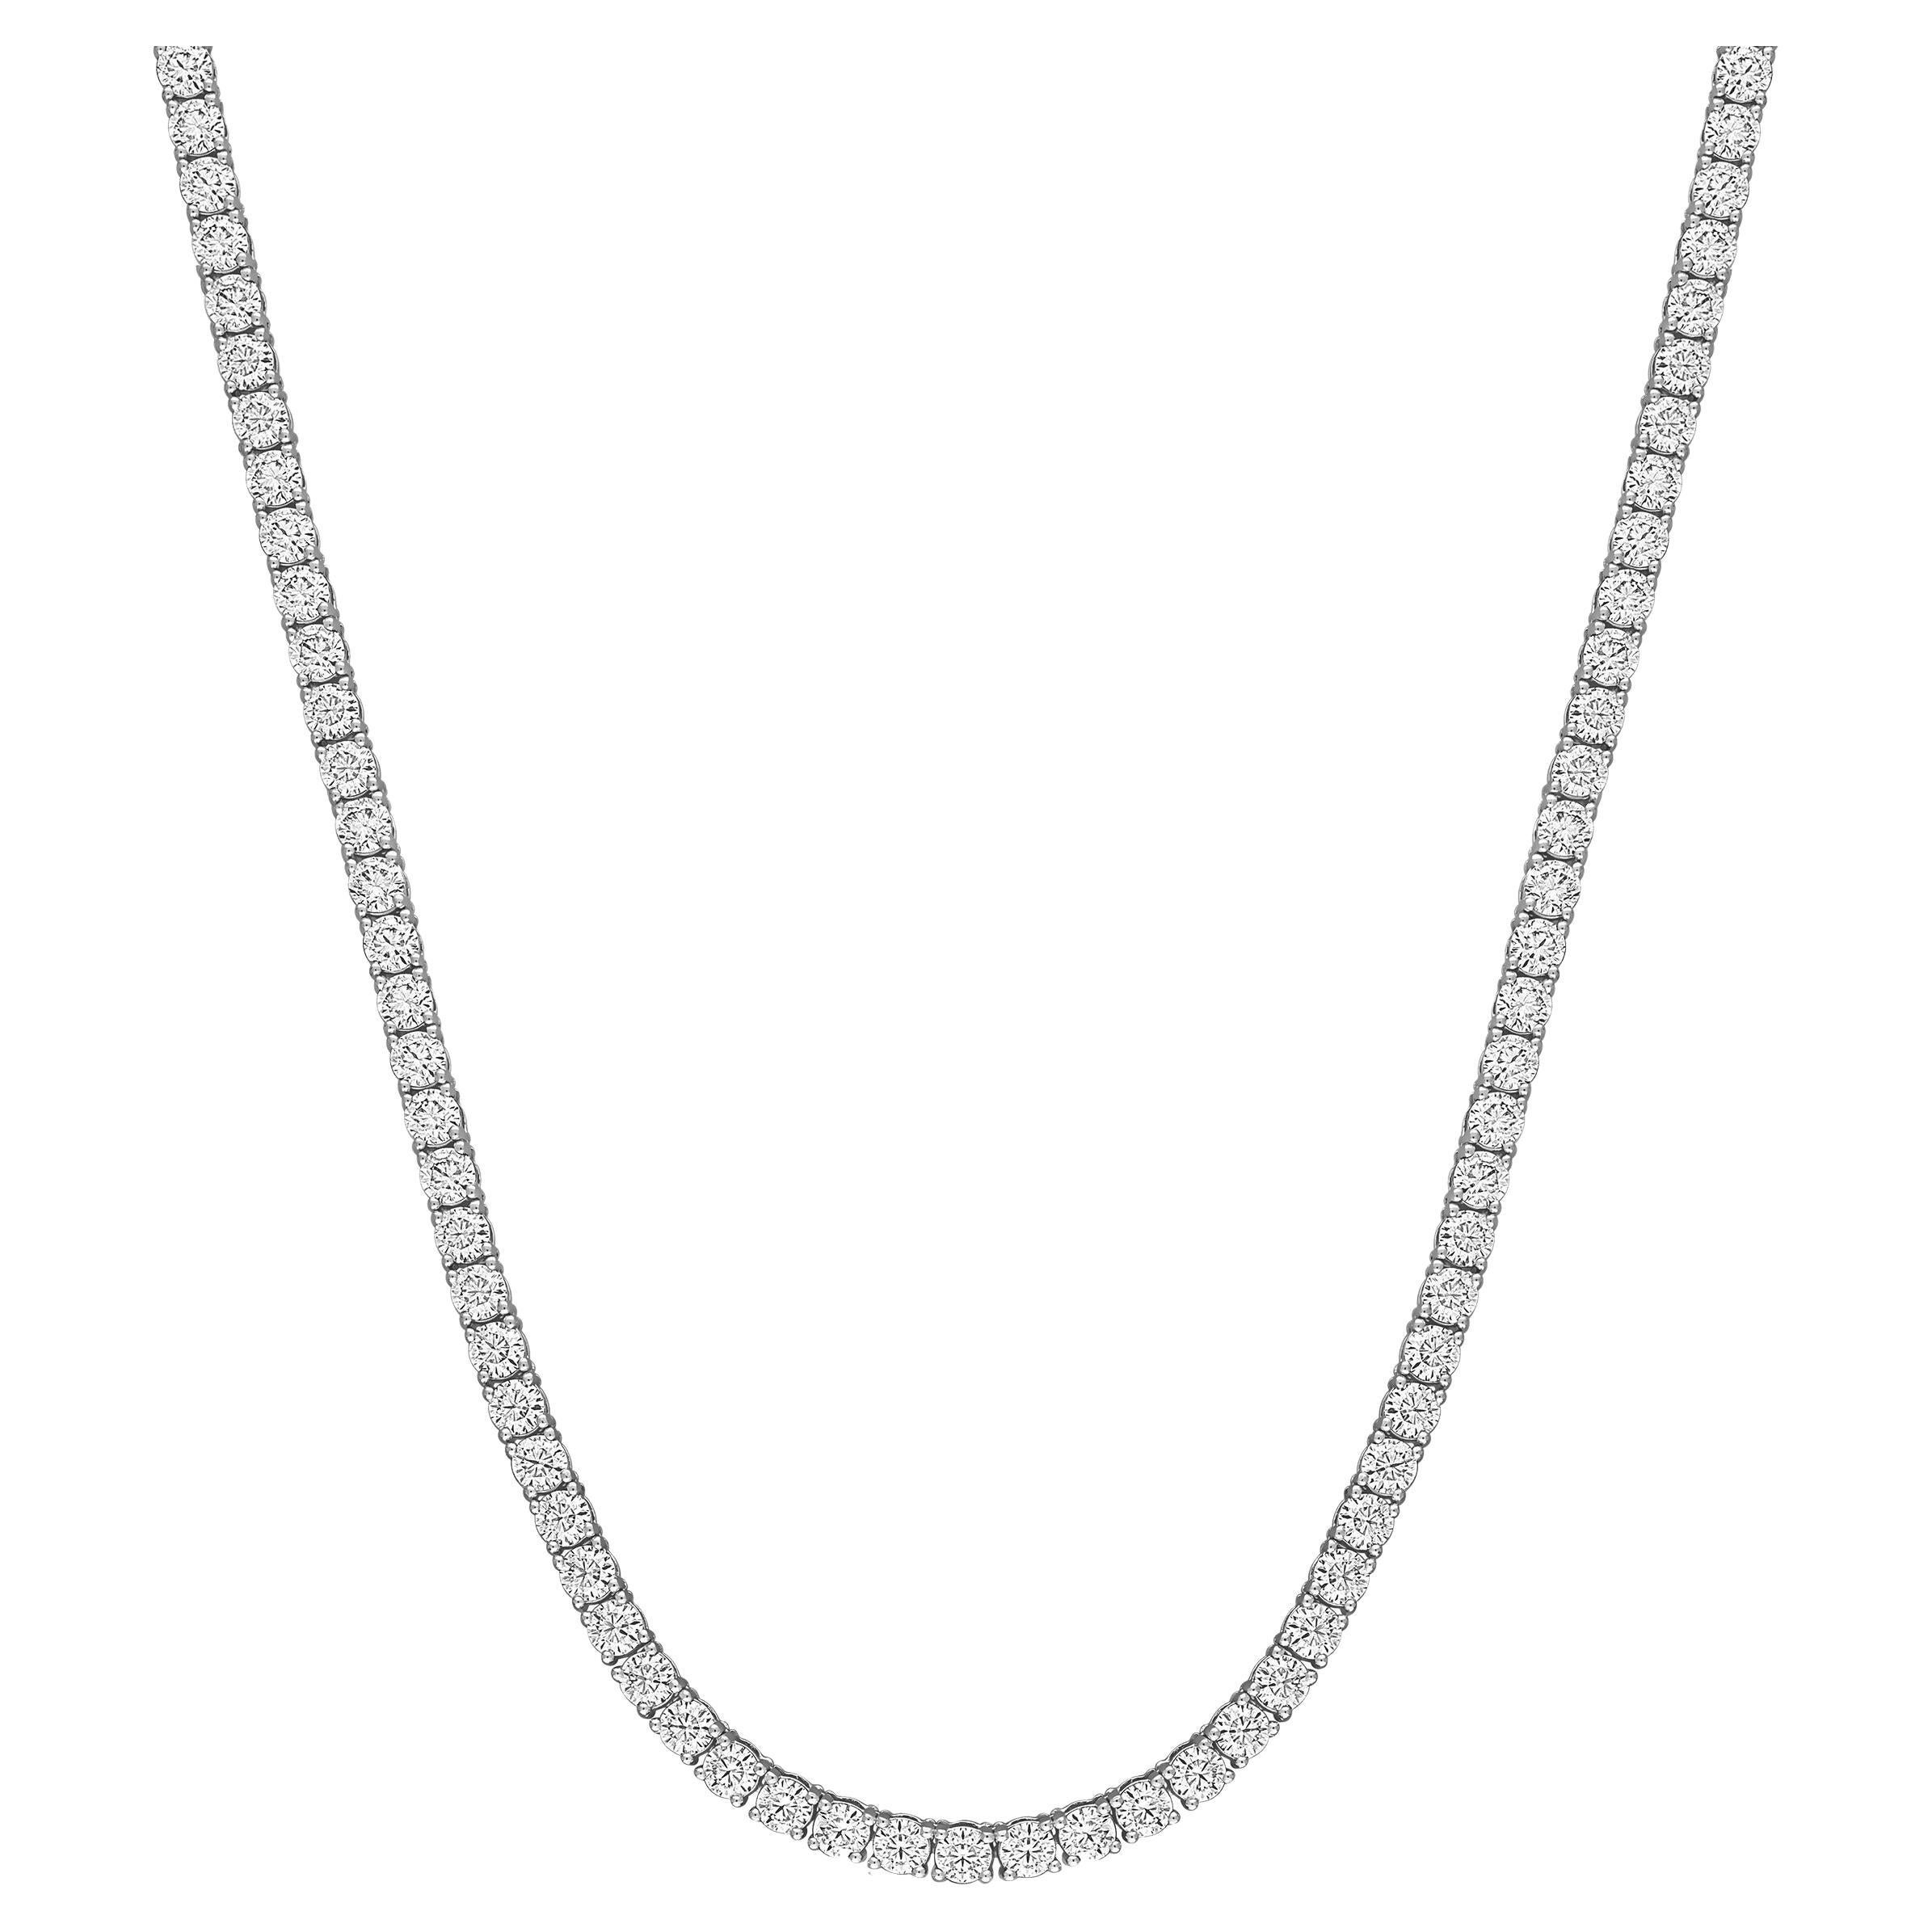 17.21 Carat Diamond Tennis Necklace in 14K White Gold For Sale